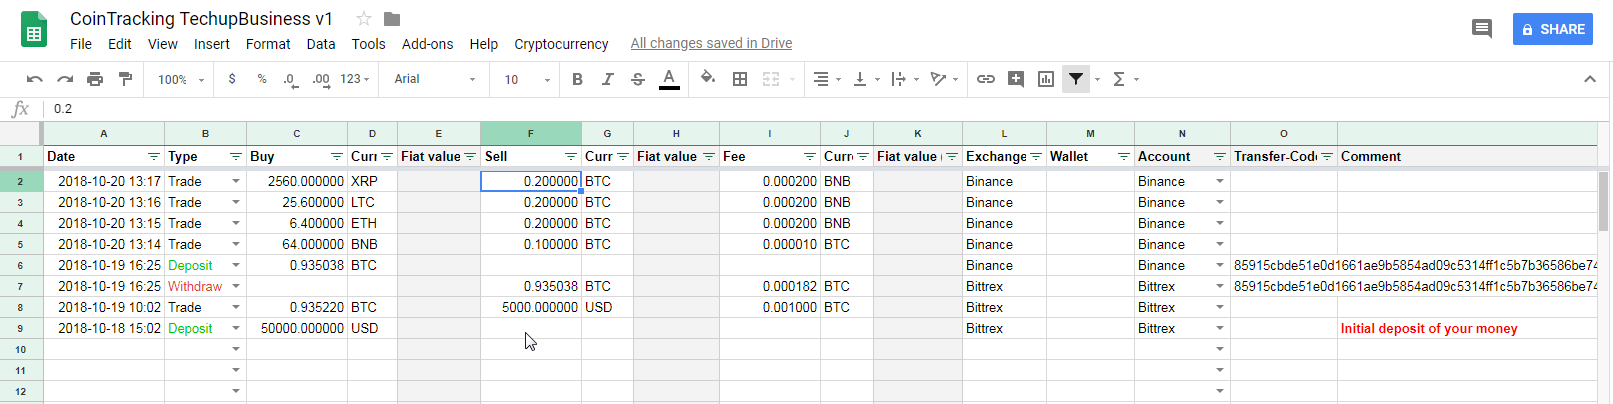 free altcoin daytrading spreadsheet